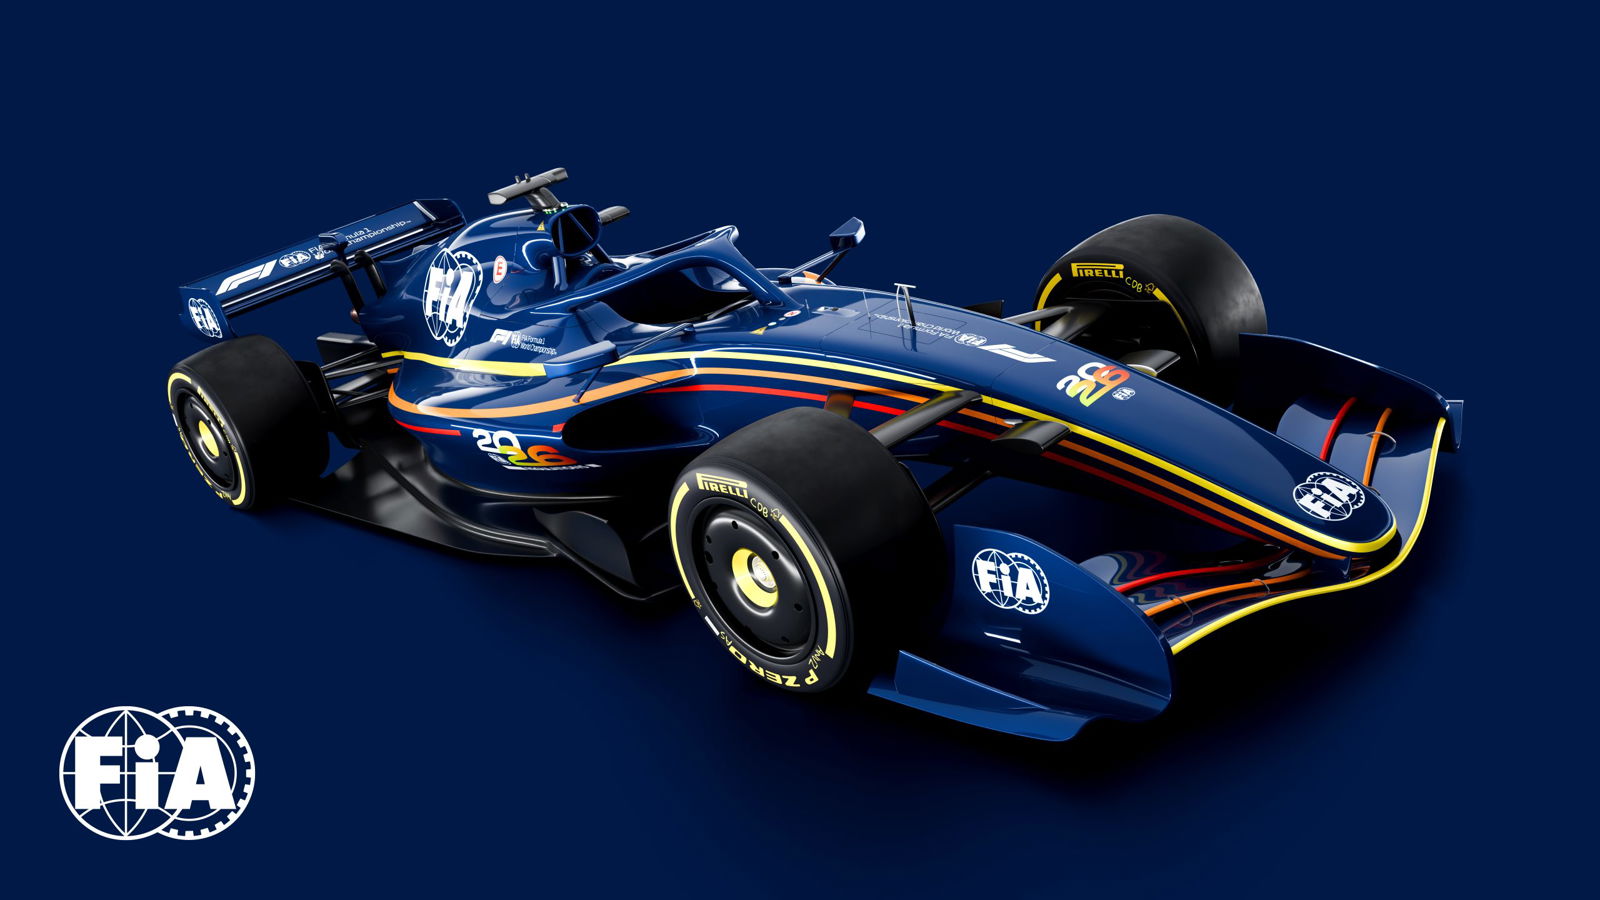 The next generation of rules in Formula 1 have been developed to produce more “nimble” cars according to the FIA. Image: FIA